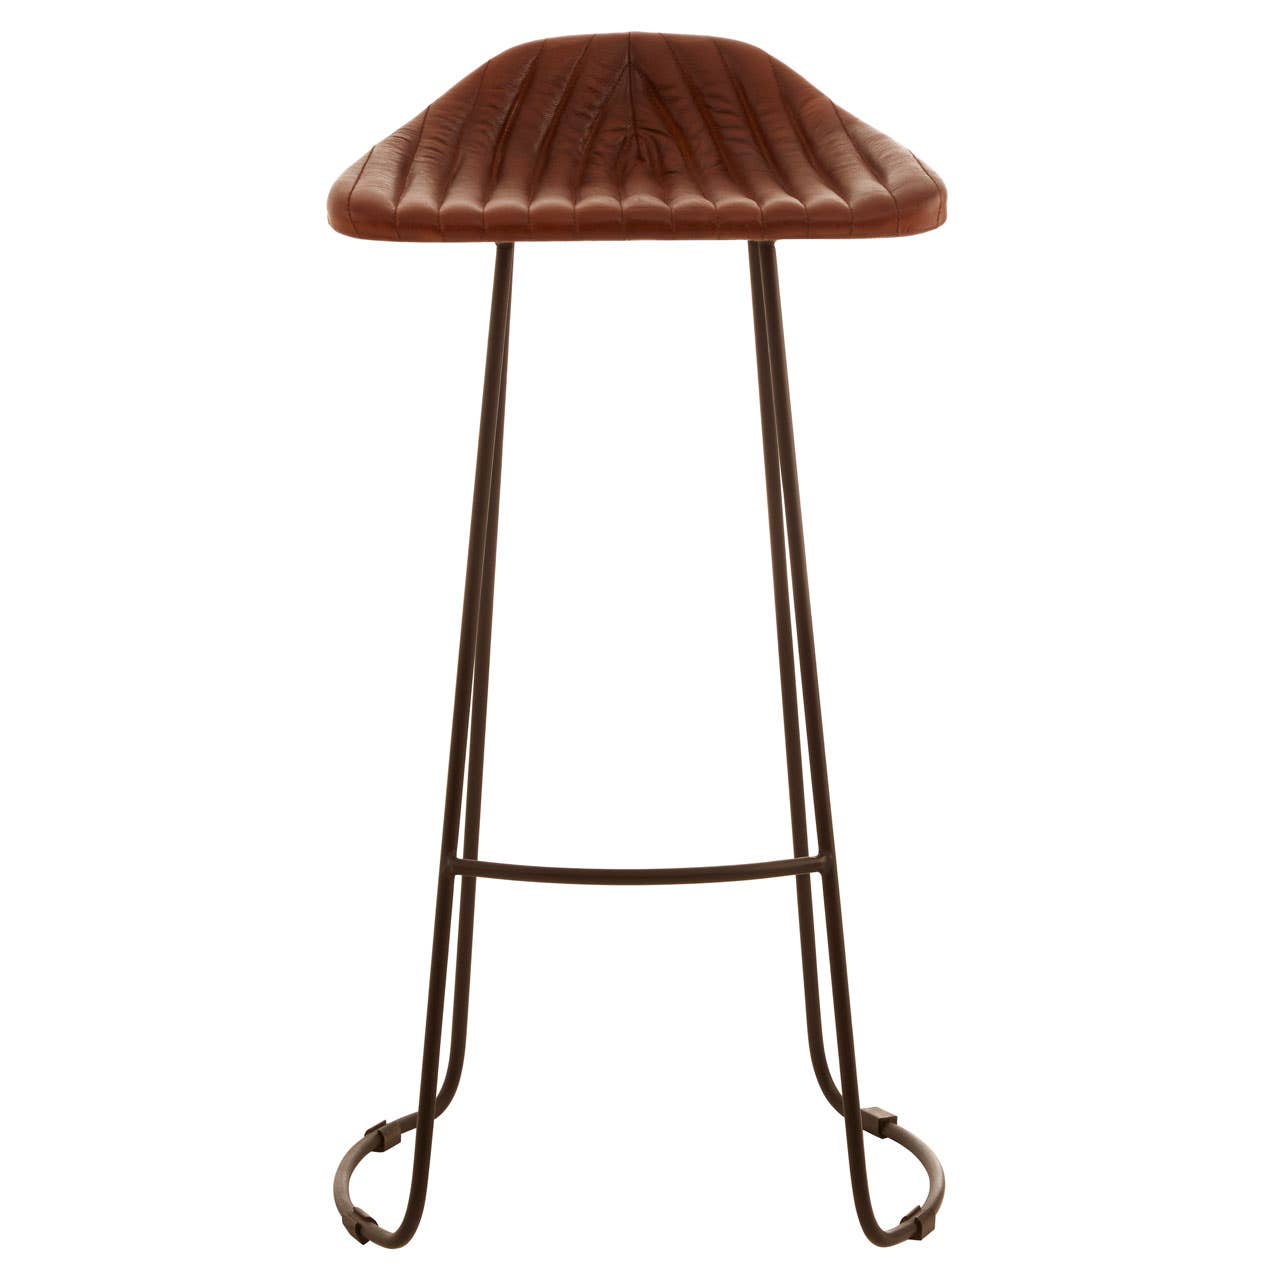 Park Lane Biscuit Tan Buffalo Leather Bar & Kitchen Stool With Iron Legs & Footrest